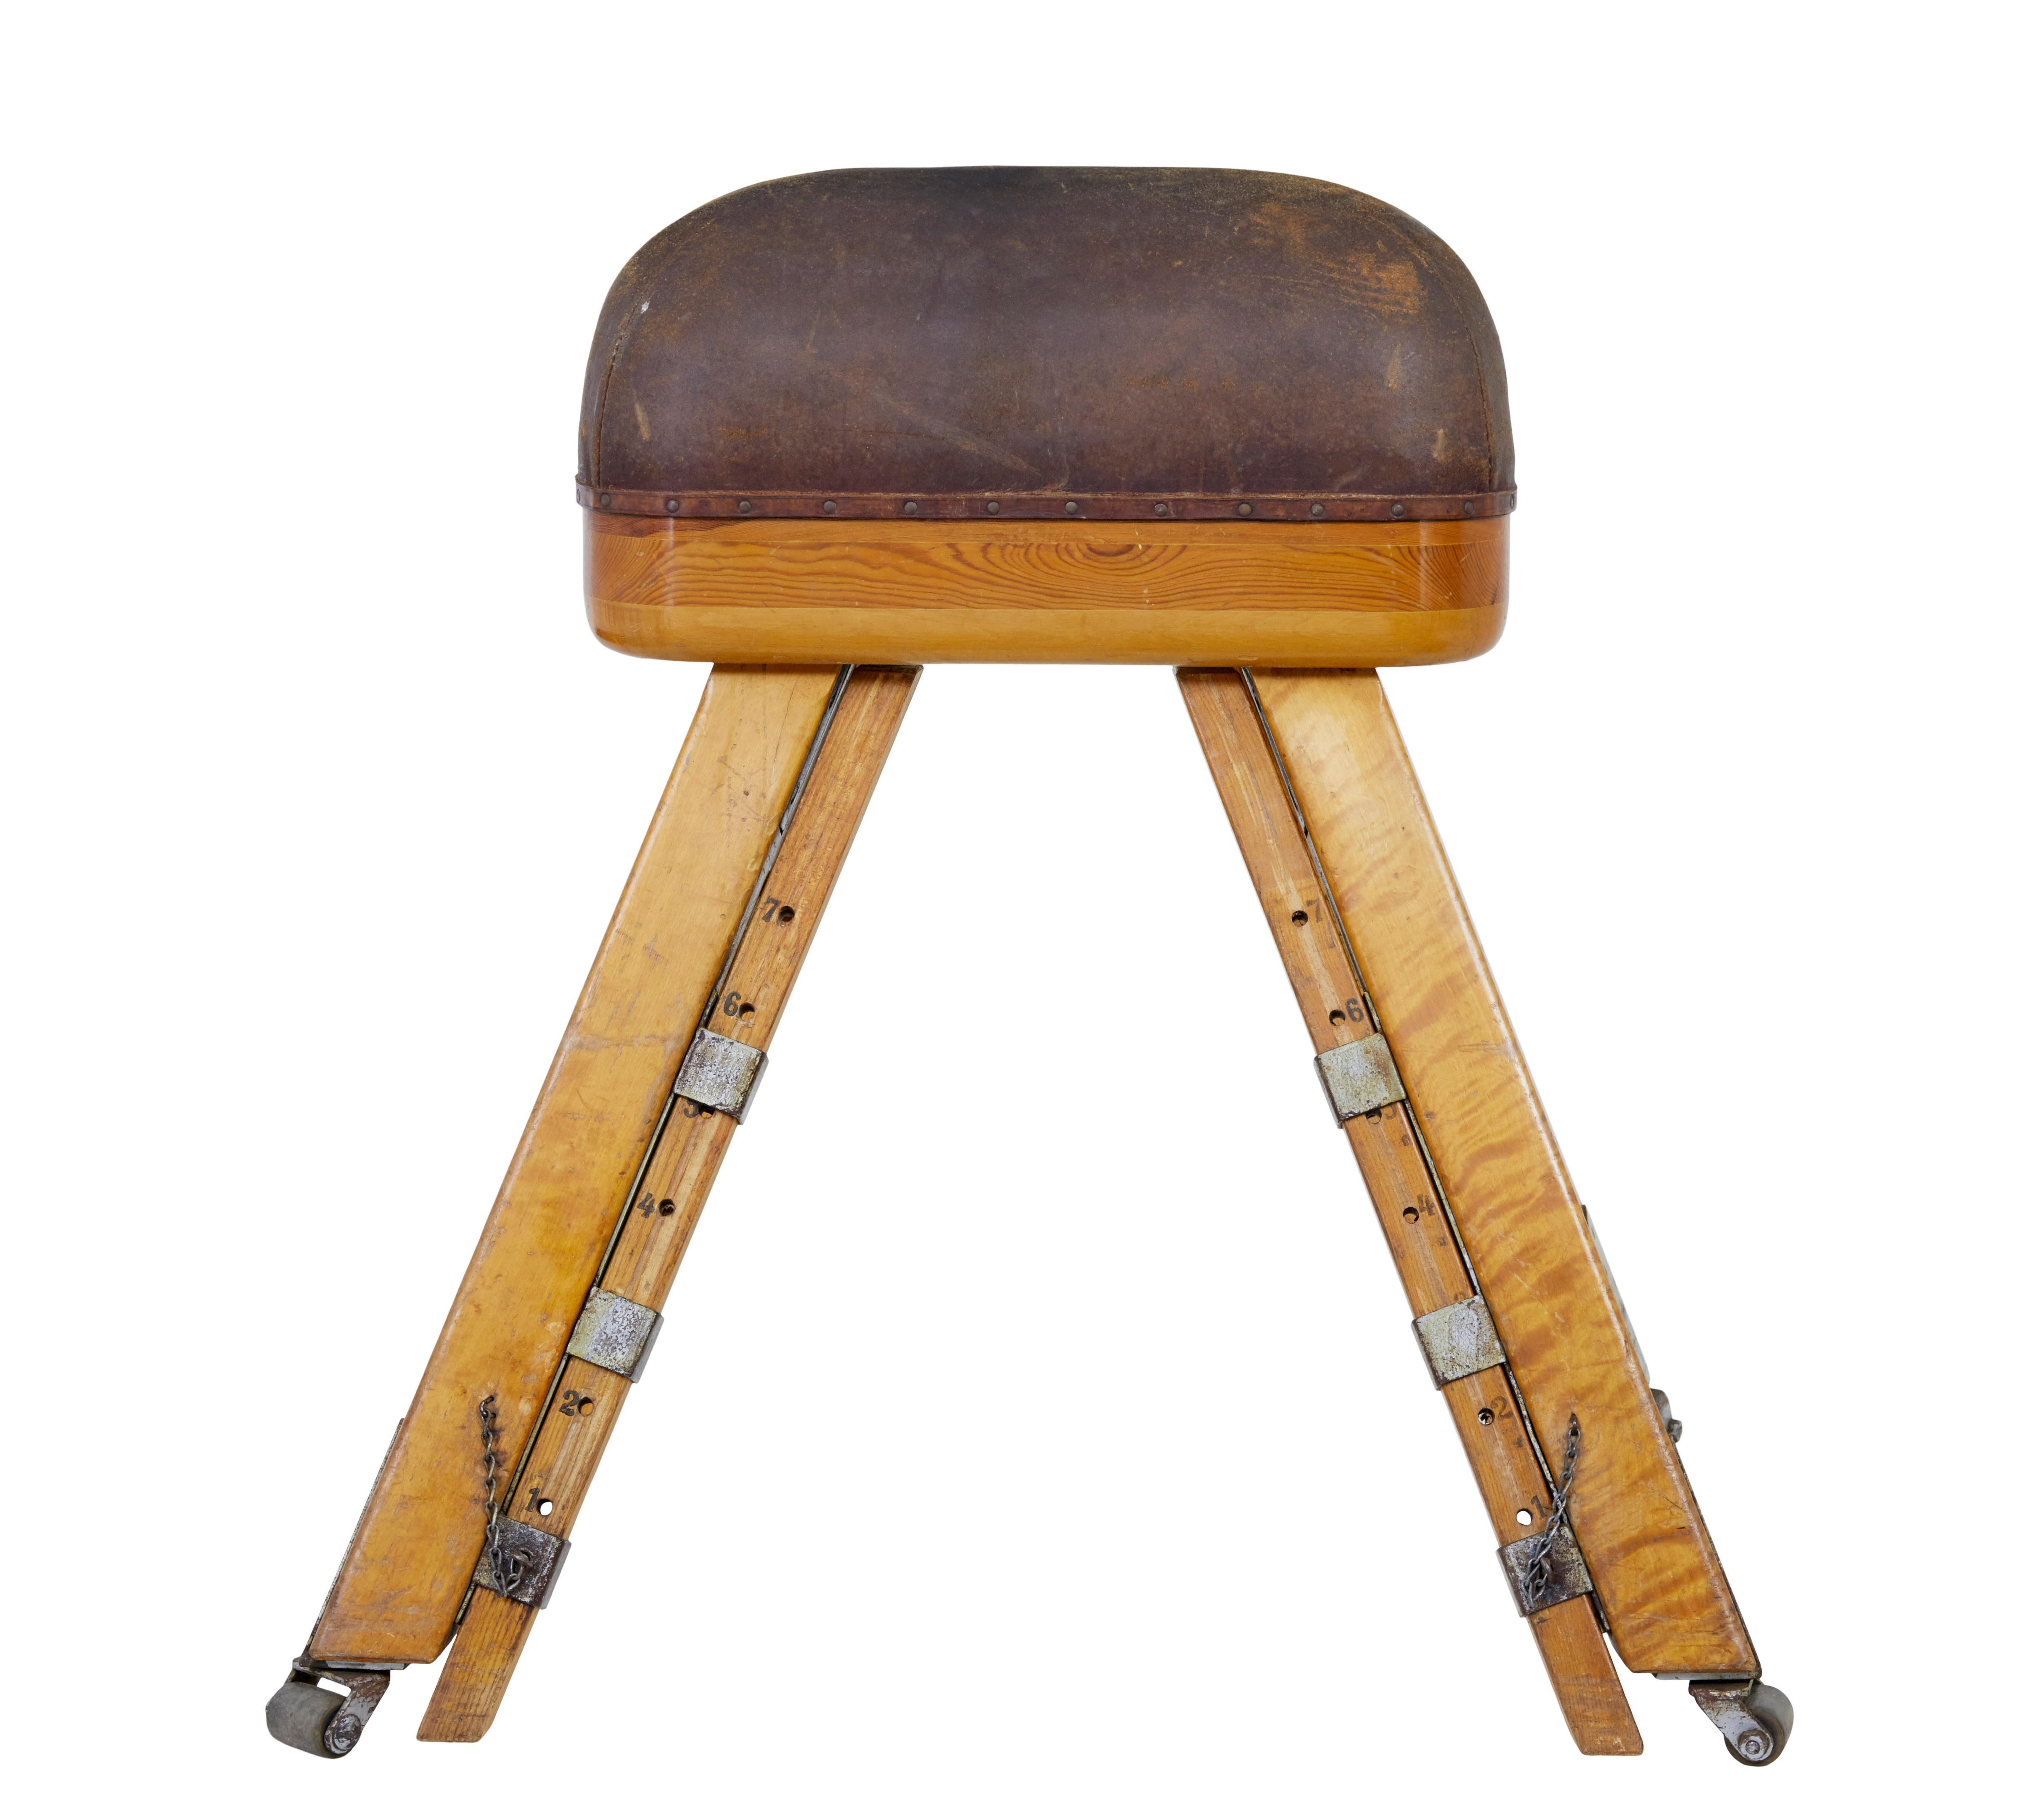 Large Mid-20th century Scandinavian pine gym horse circa 1950.

Here we offer a Swedish made gym horse made from solid pine. We believe this is a full Size gym horse which makes this a heavy item.

Shaped hide covering a solid weighted pine